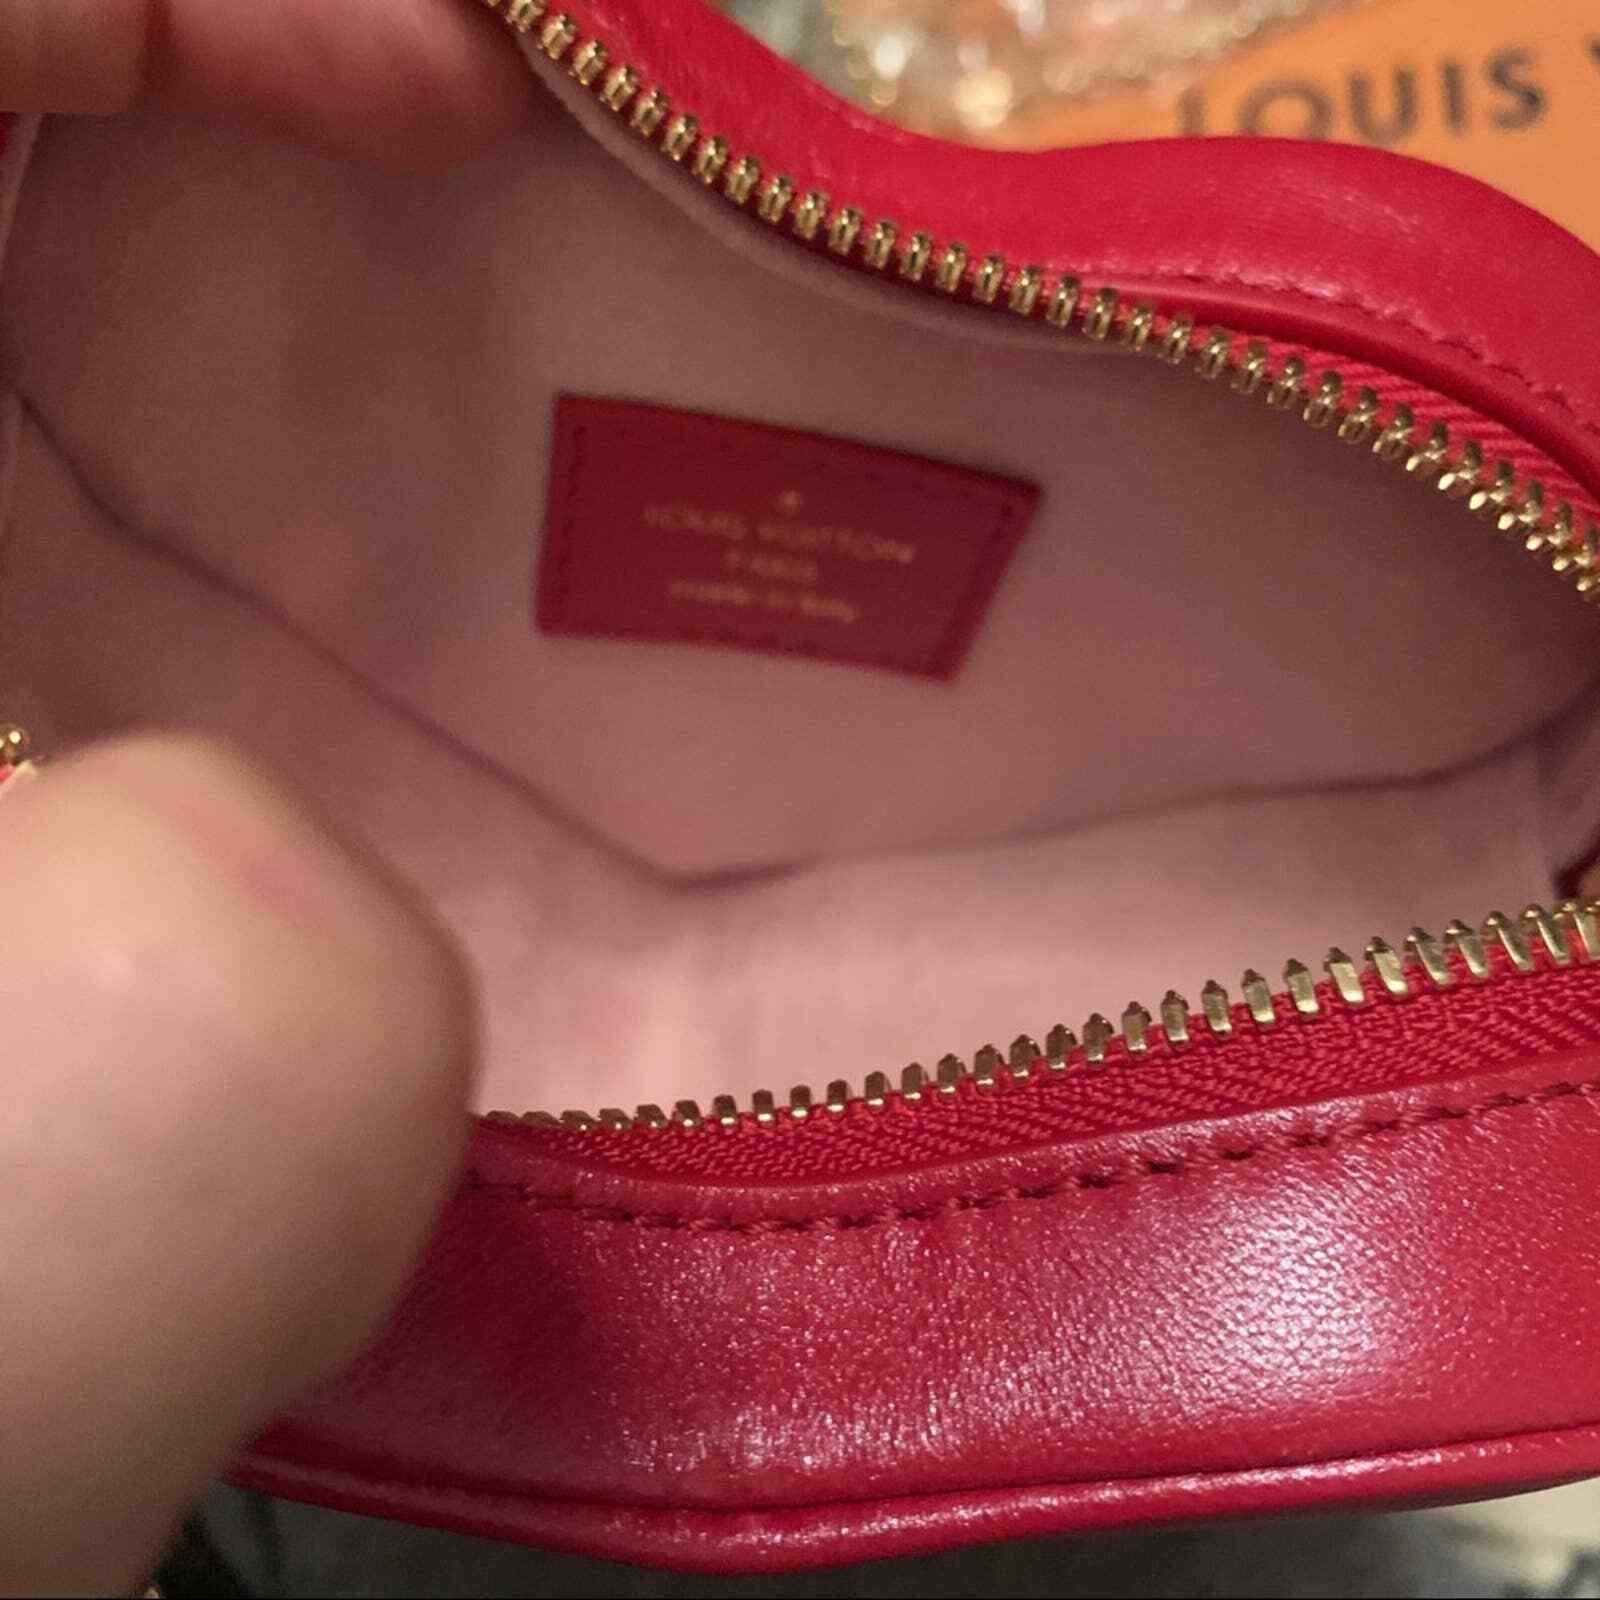 Louis Vuitton Heart Bag on Chain Fall in Love red leather mini leather LV  bag | eBay